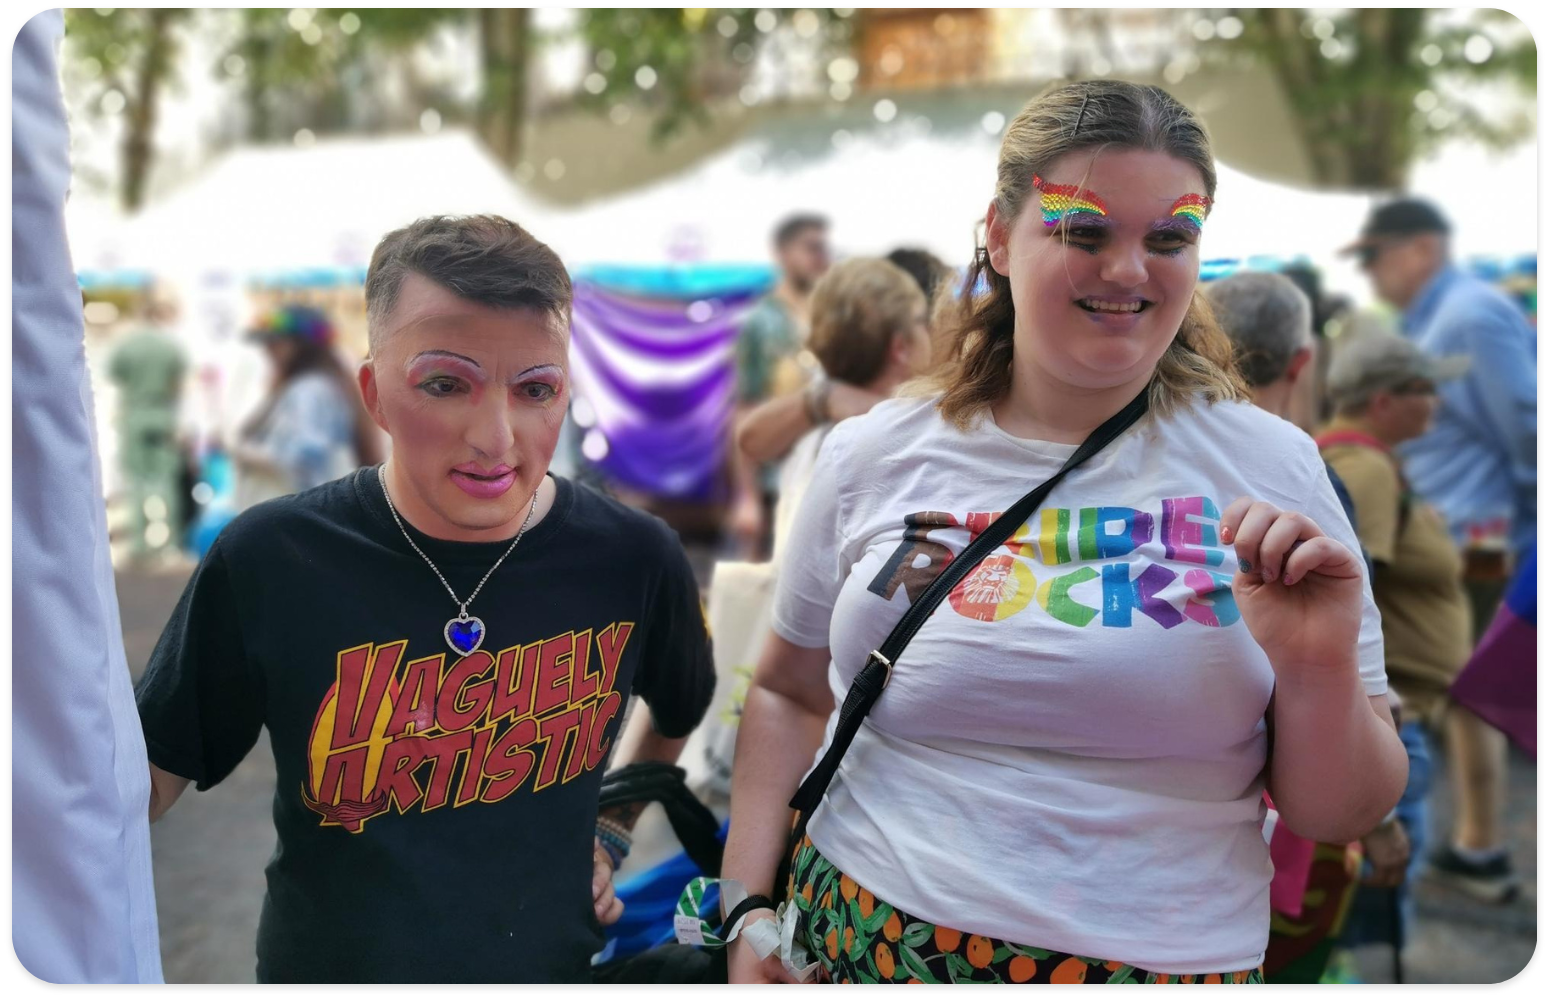 Mark, to the left wears a black tshirt with Vaguely Artistic printed in red capital letters and a yellow shape in the background. They are wearing pink lipstick overlining their lips and colourful pink and white eyeshadow. Mark also has a silver chain with a blue heart-shaped gemstone around their neck. Katie, to the right, is wearing a white tshirt with the words pride rocks on the front, in the colours of the pride flag. They are wearing gemsones on their eyebrows in the colours of the pride flag and the transgender pride flag colours on their lips. Katie is smiling while looking away from the camera.